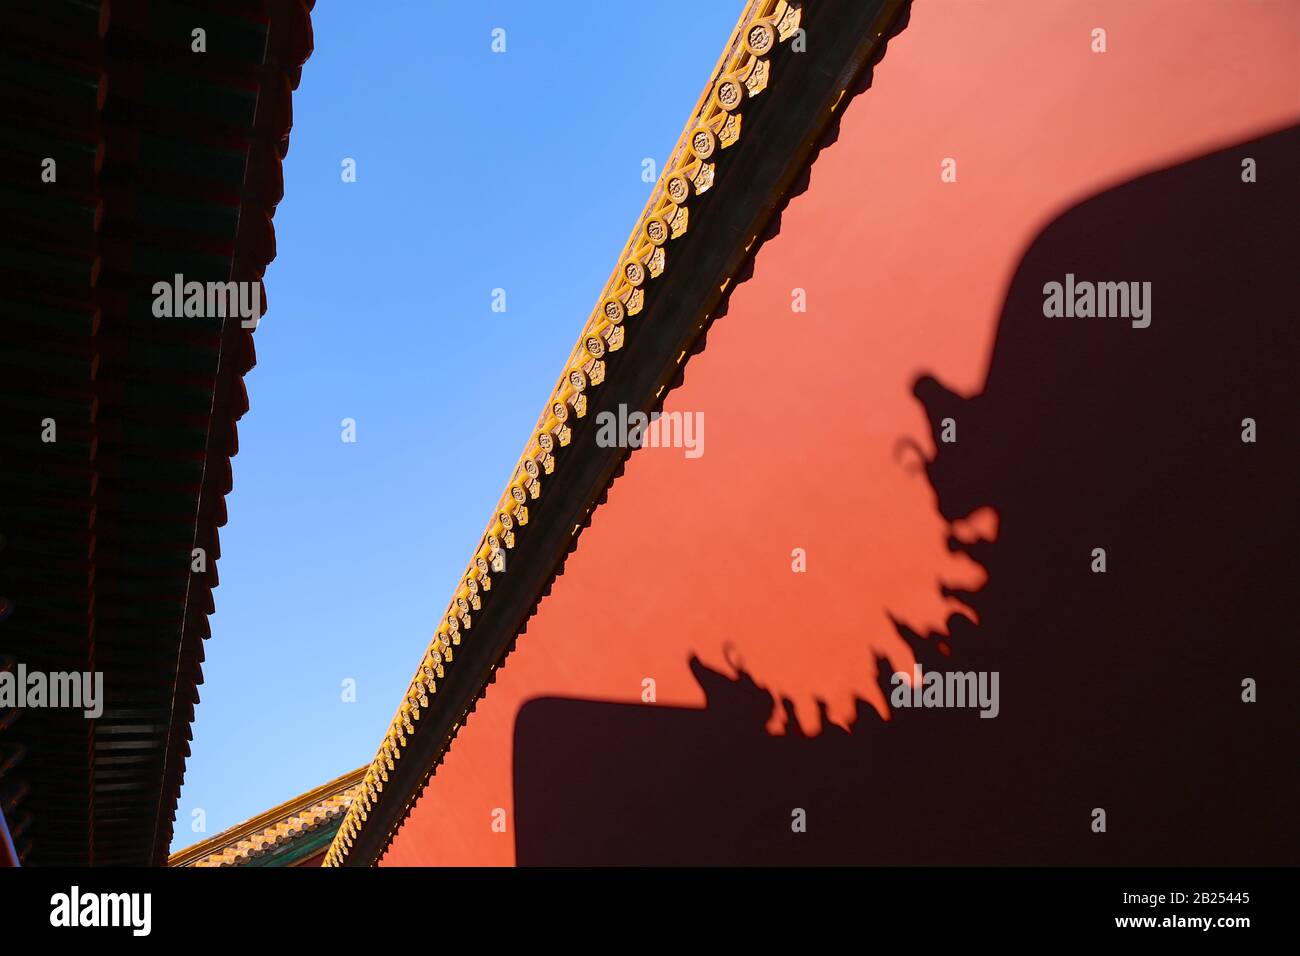 Red wall of the Forbidden City with shadow reflection, Beijing, China Stock Photo